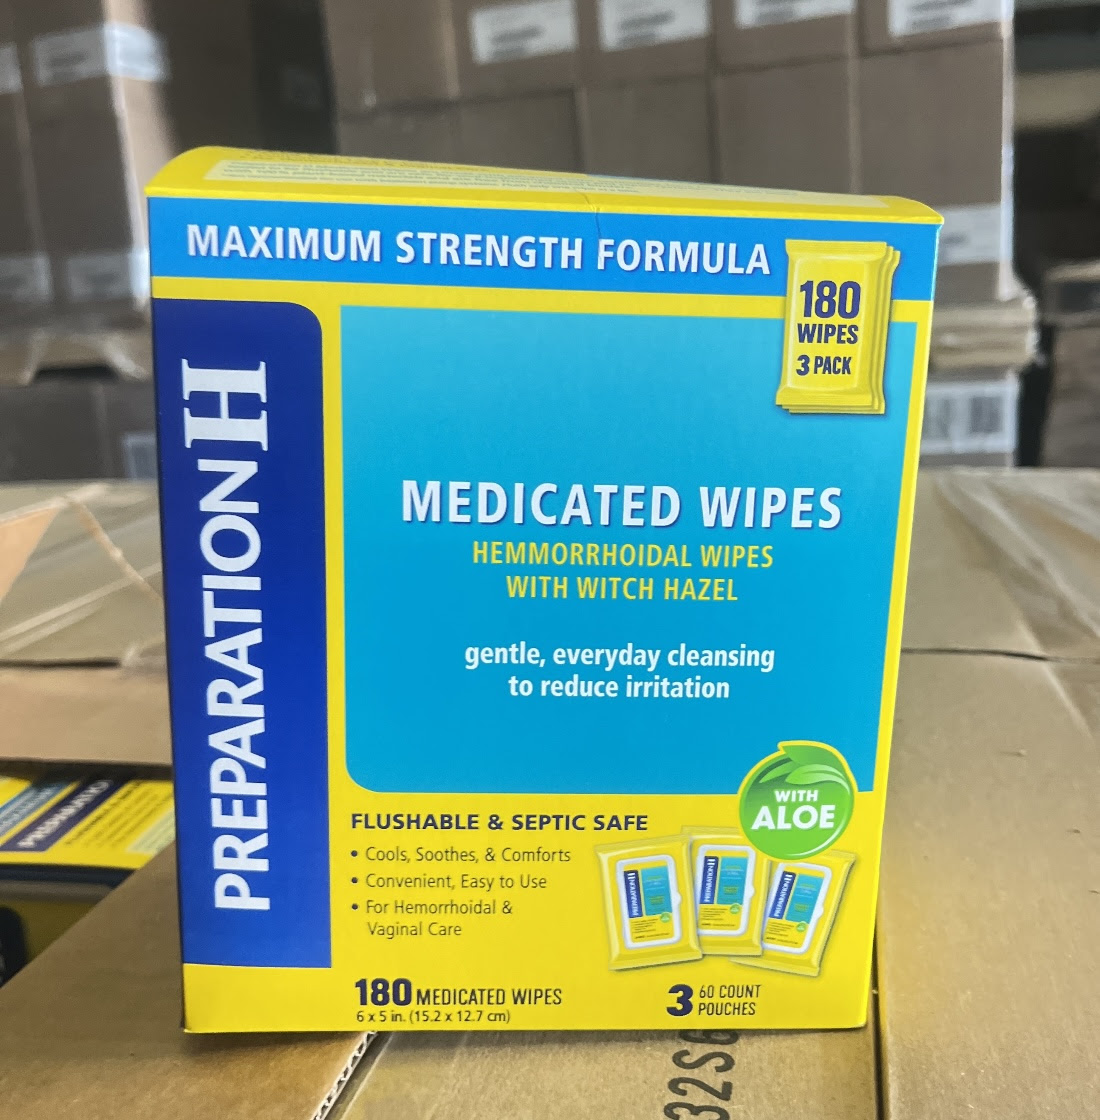 Preparation H Maximum Strength Medicated Wipes 180 Ct. 5400Boxes. EXW Los Angeles $7.95/Box.